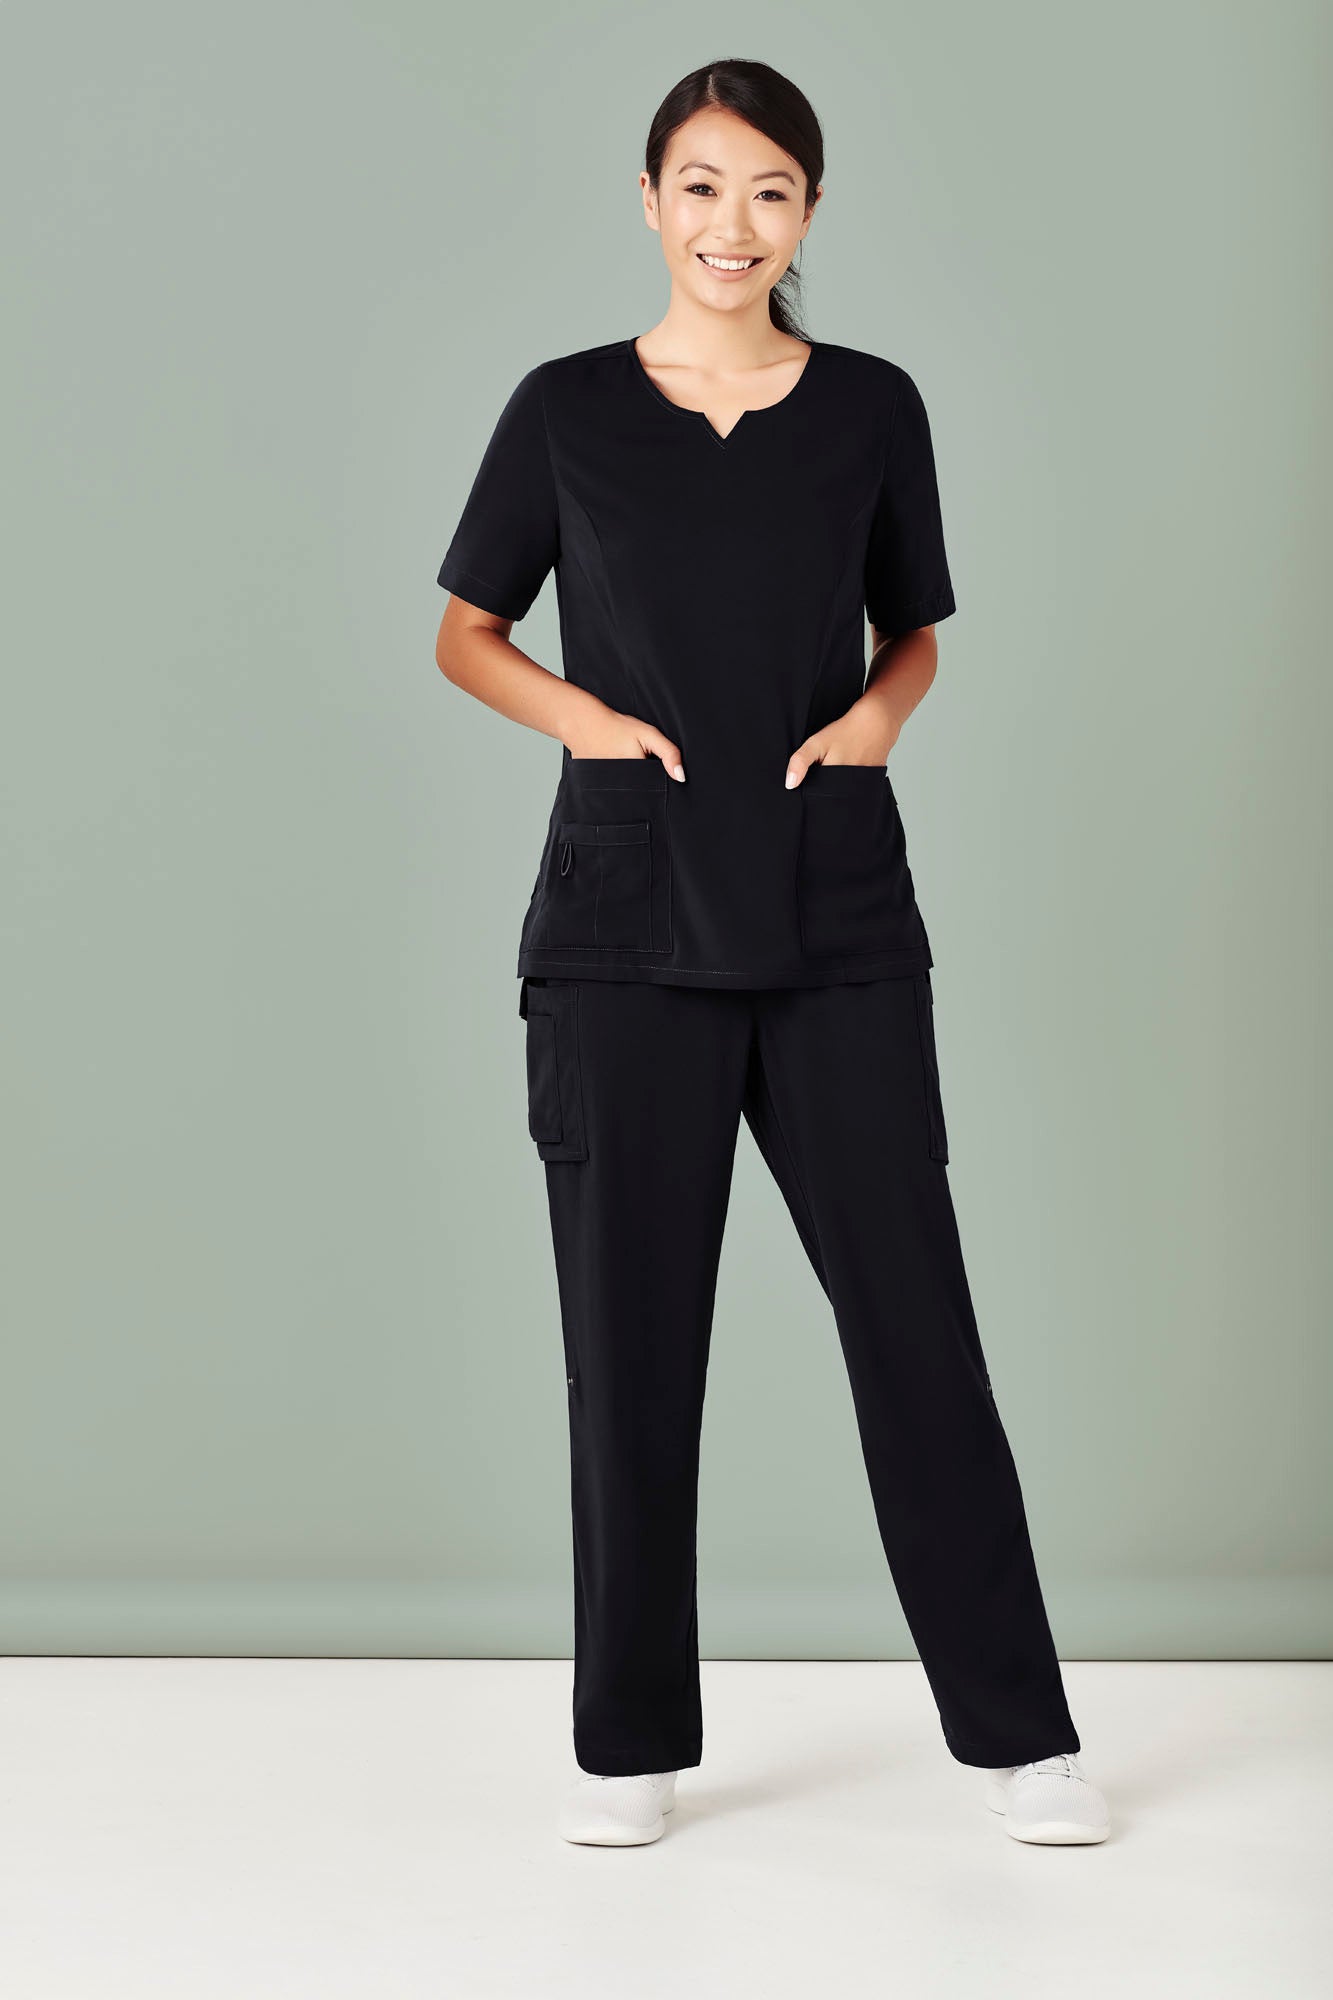 Womens Tailored Fit Round Neck Scrub Top